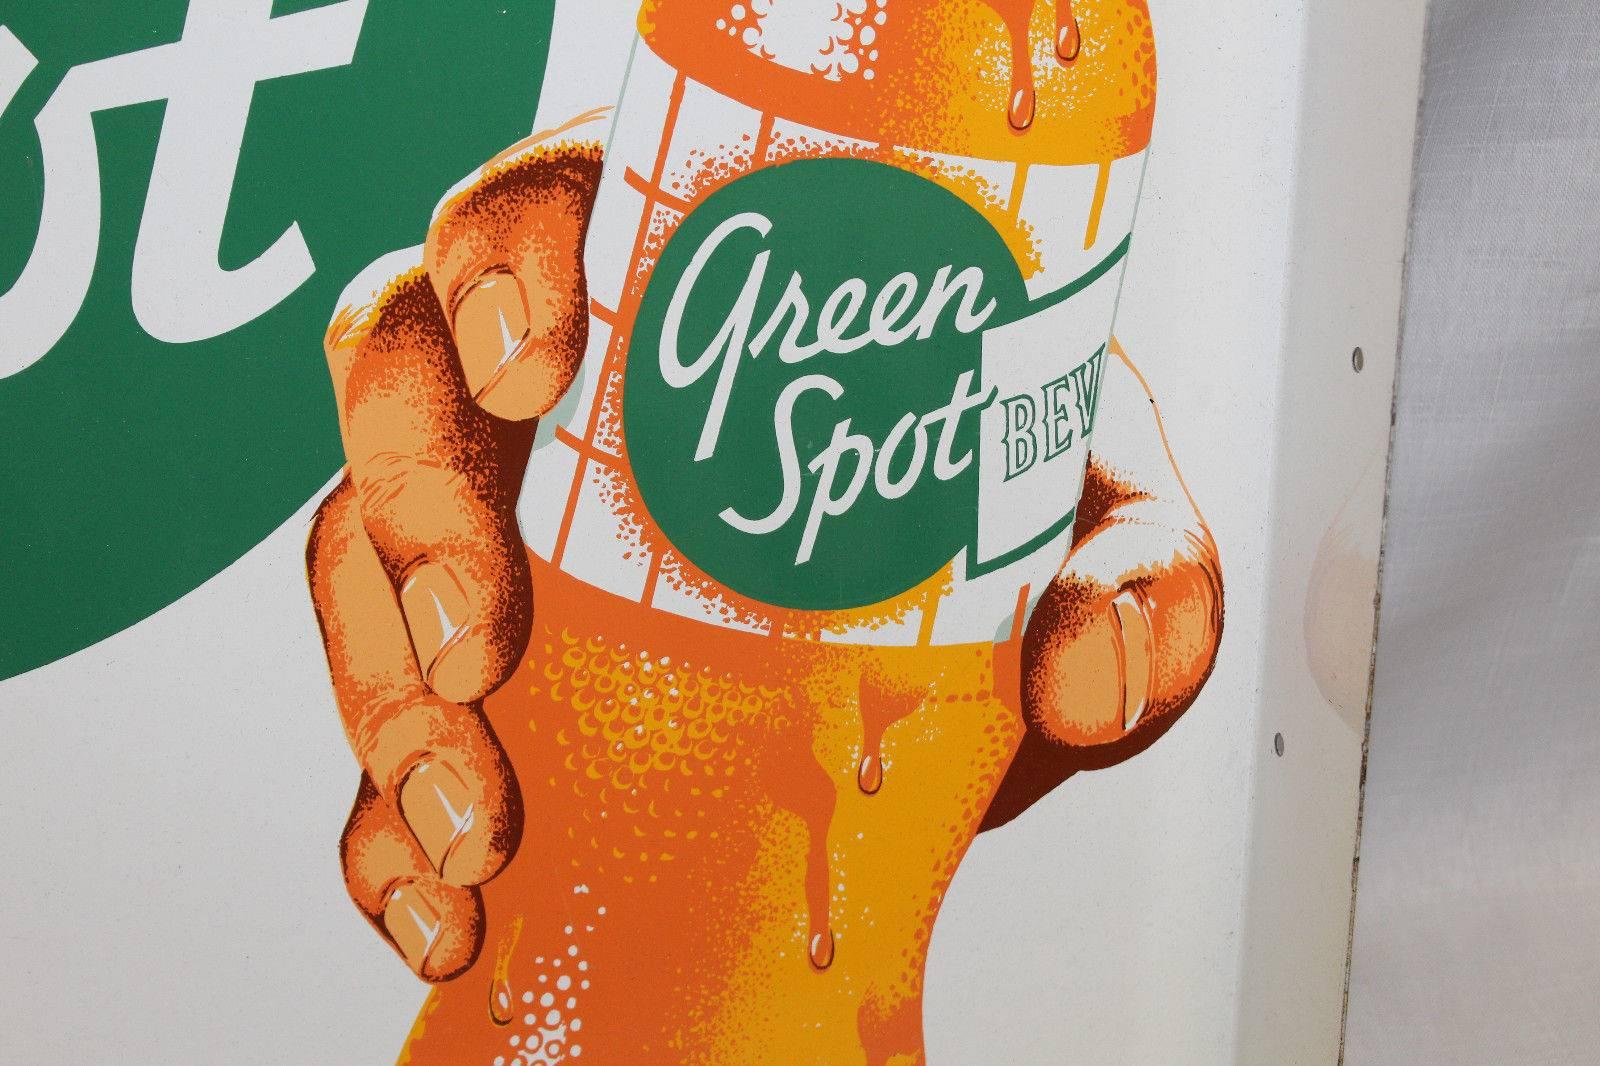 1950s NOS Green Spot Orange Soda Double-Sided Advertising Tin Flange Sign For Sale 2